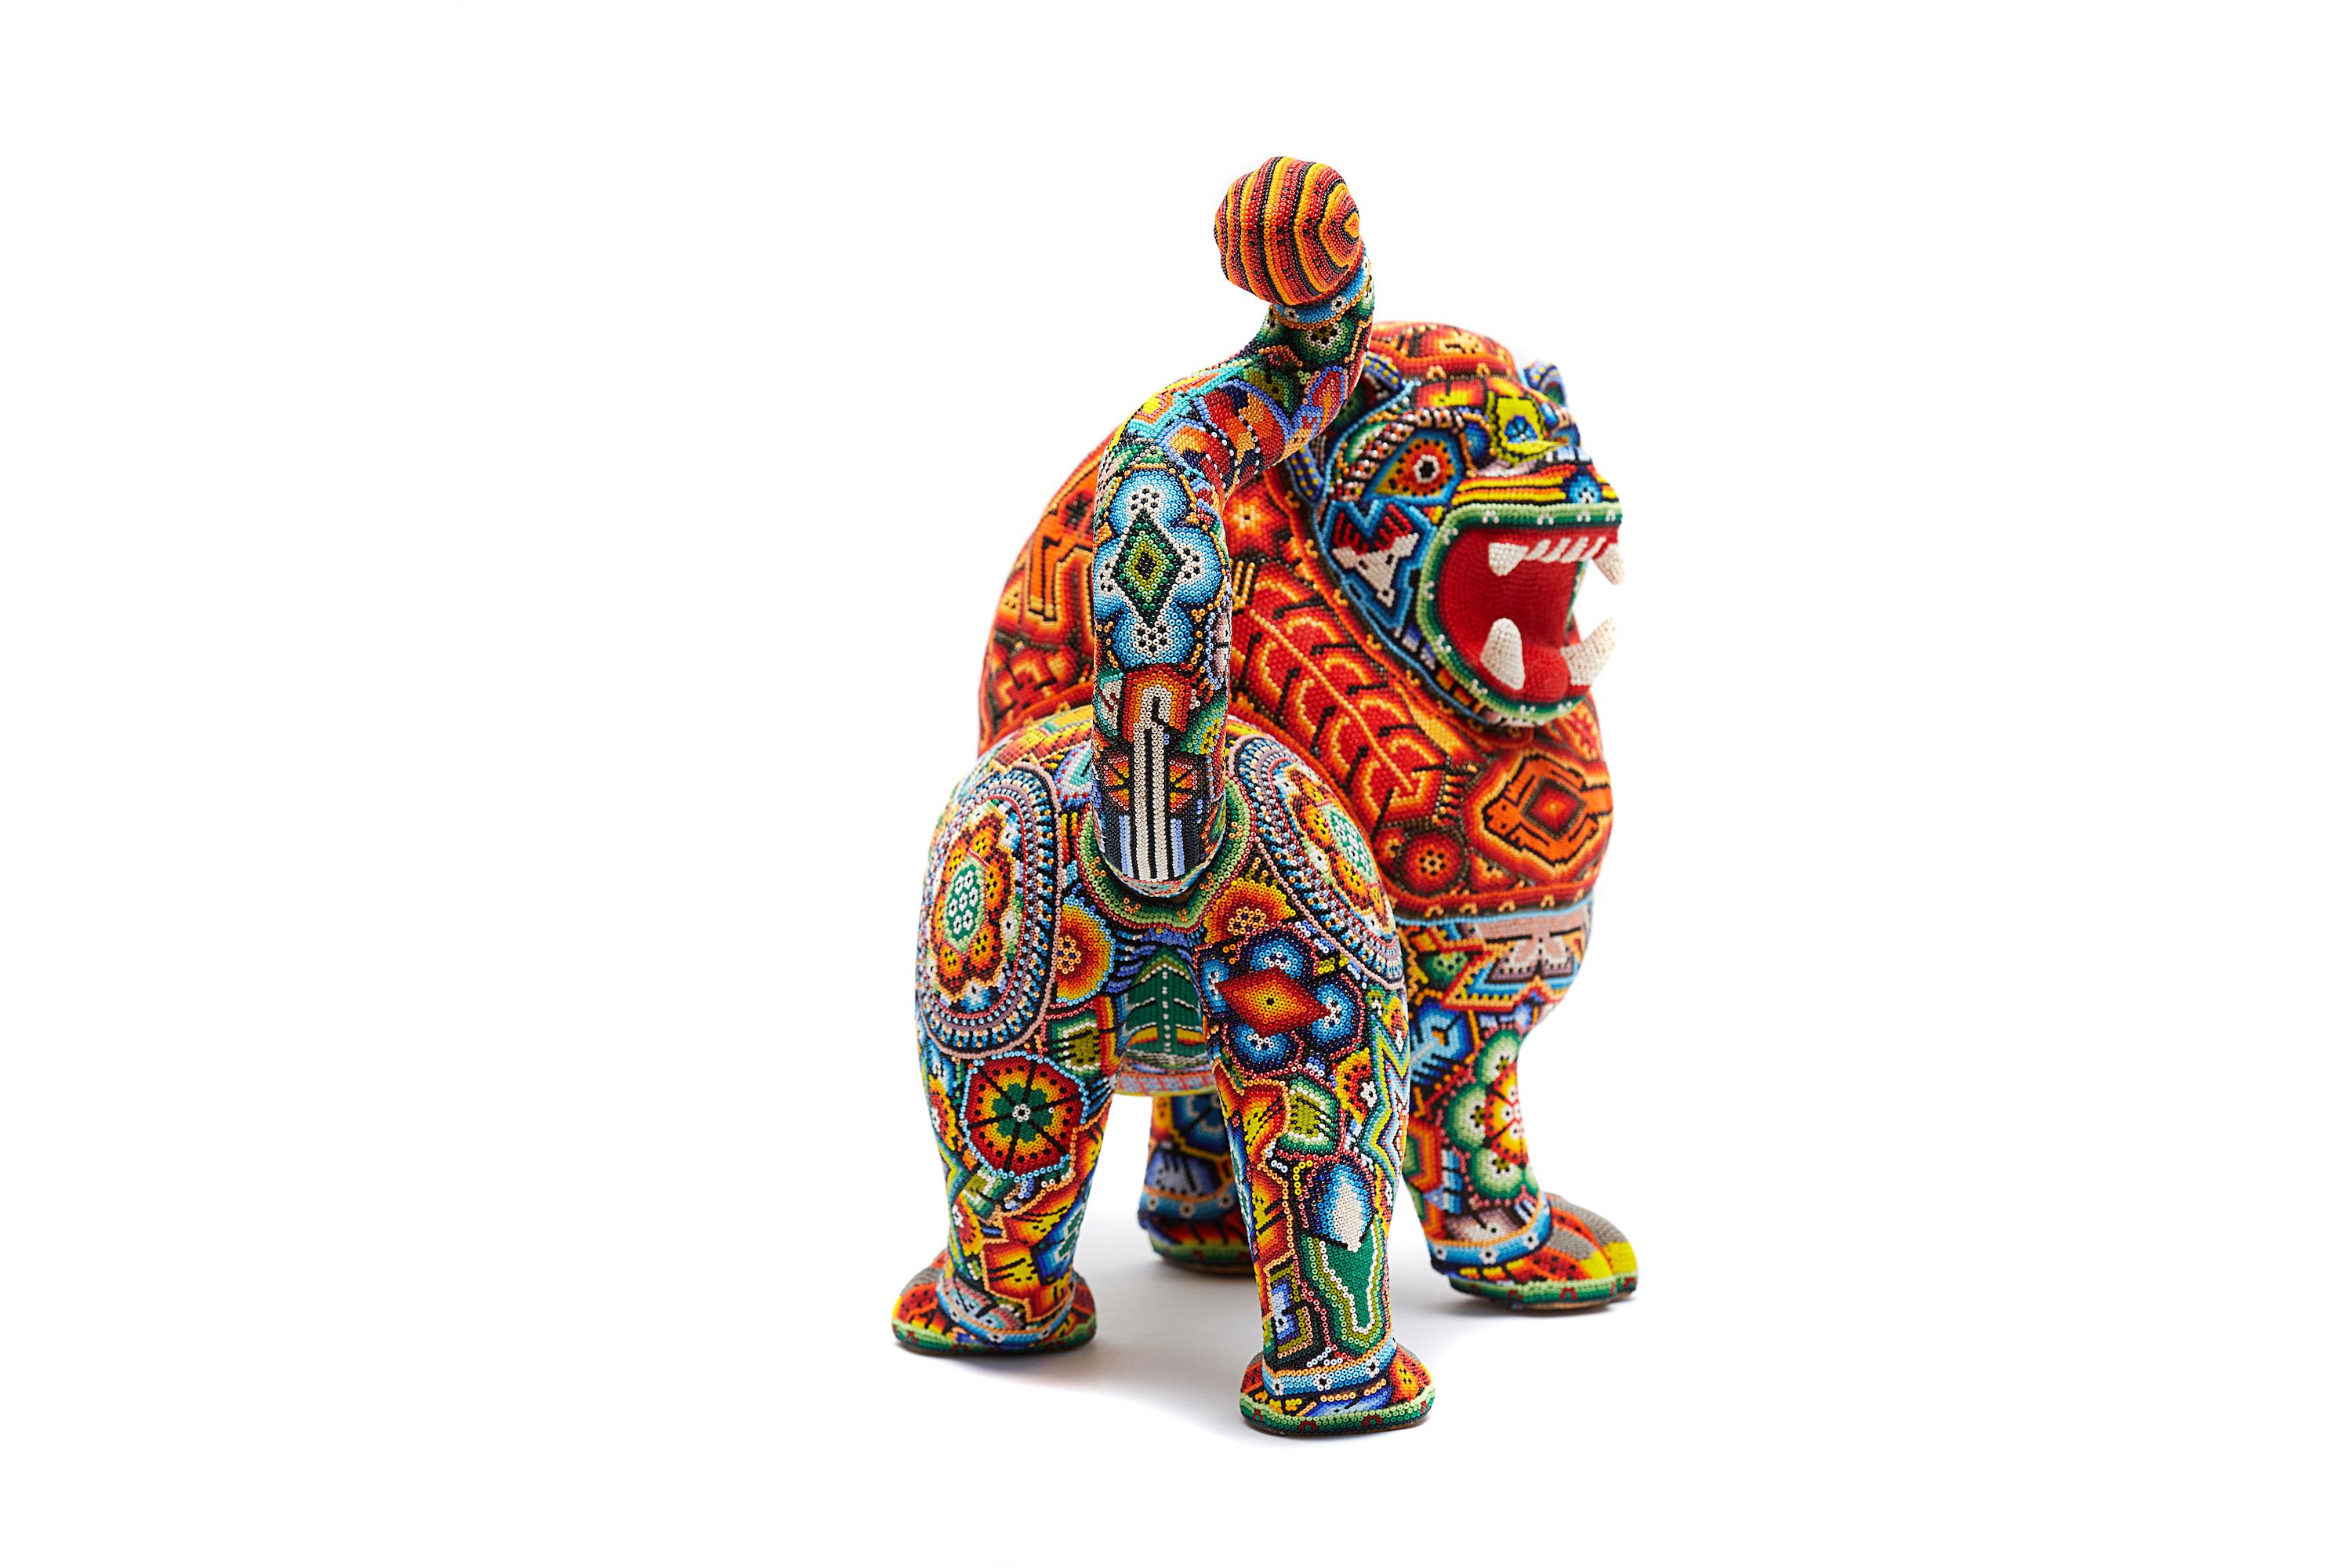 Huichol Indian -  Hand beaded Sea Cow
This beautiful Huichol Sculpture beaded has such beautiful bright colors. Hand beaded sculpture with attention to detail.
At Cactus Fine Art, we offer an exclusive selection of handmade items from Mexico and